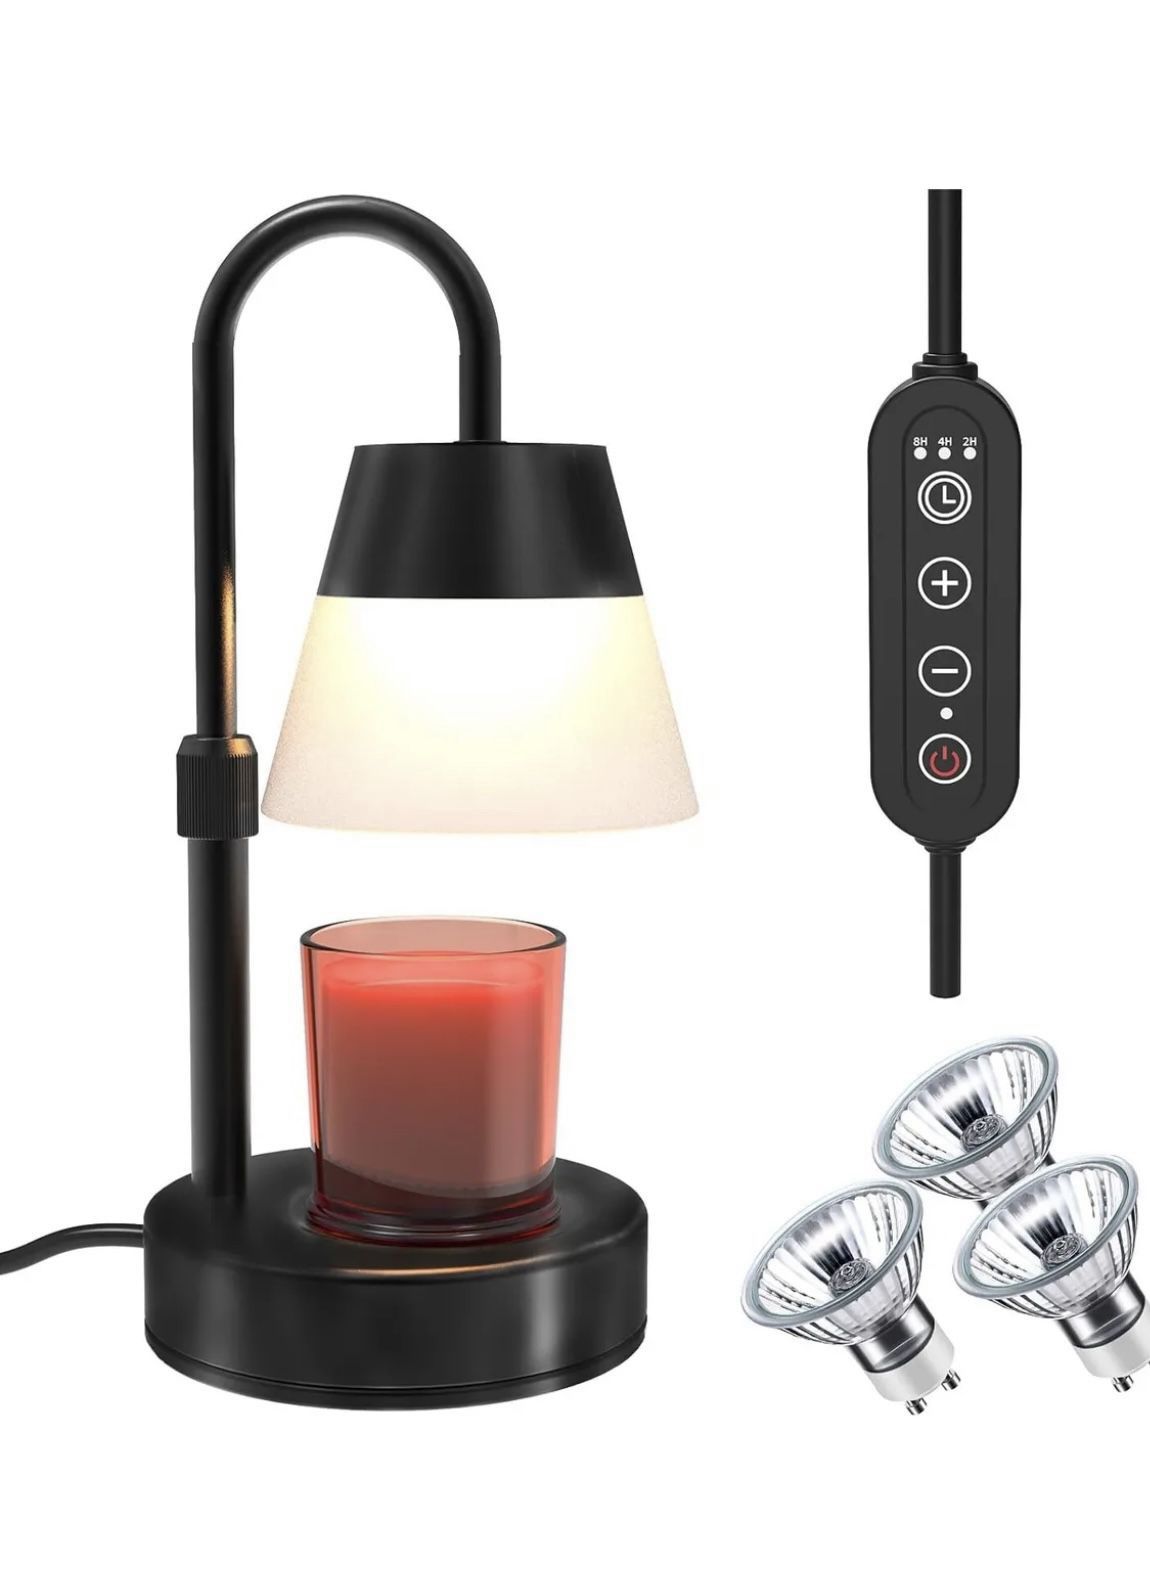 New in box Black Candle Warmer Lamp Electric Candle Warmer with Timer